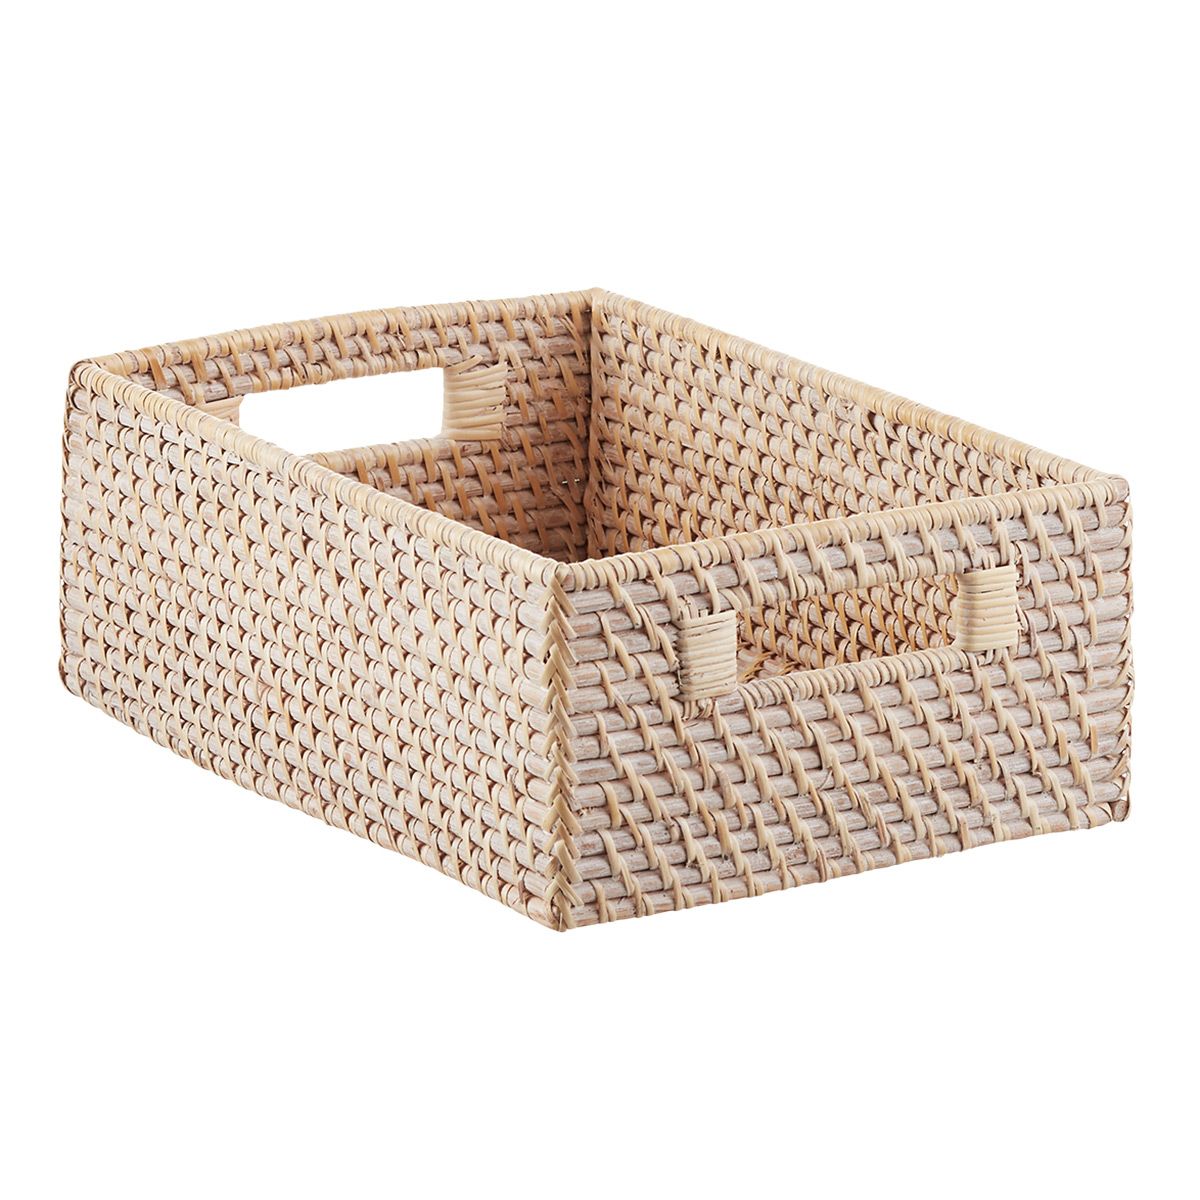 Whitewashed Rattan Storage Bins with Handles | The Container Store